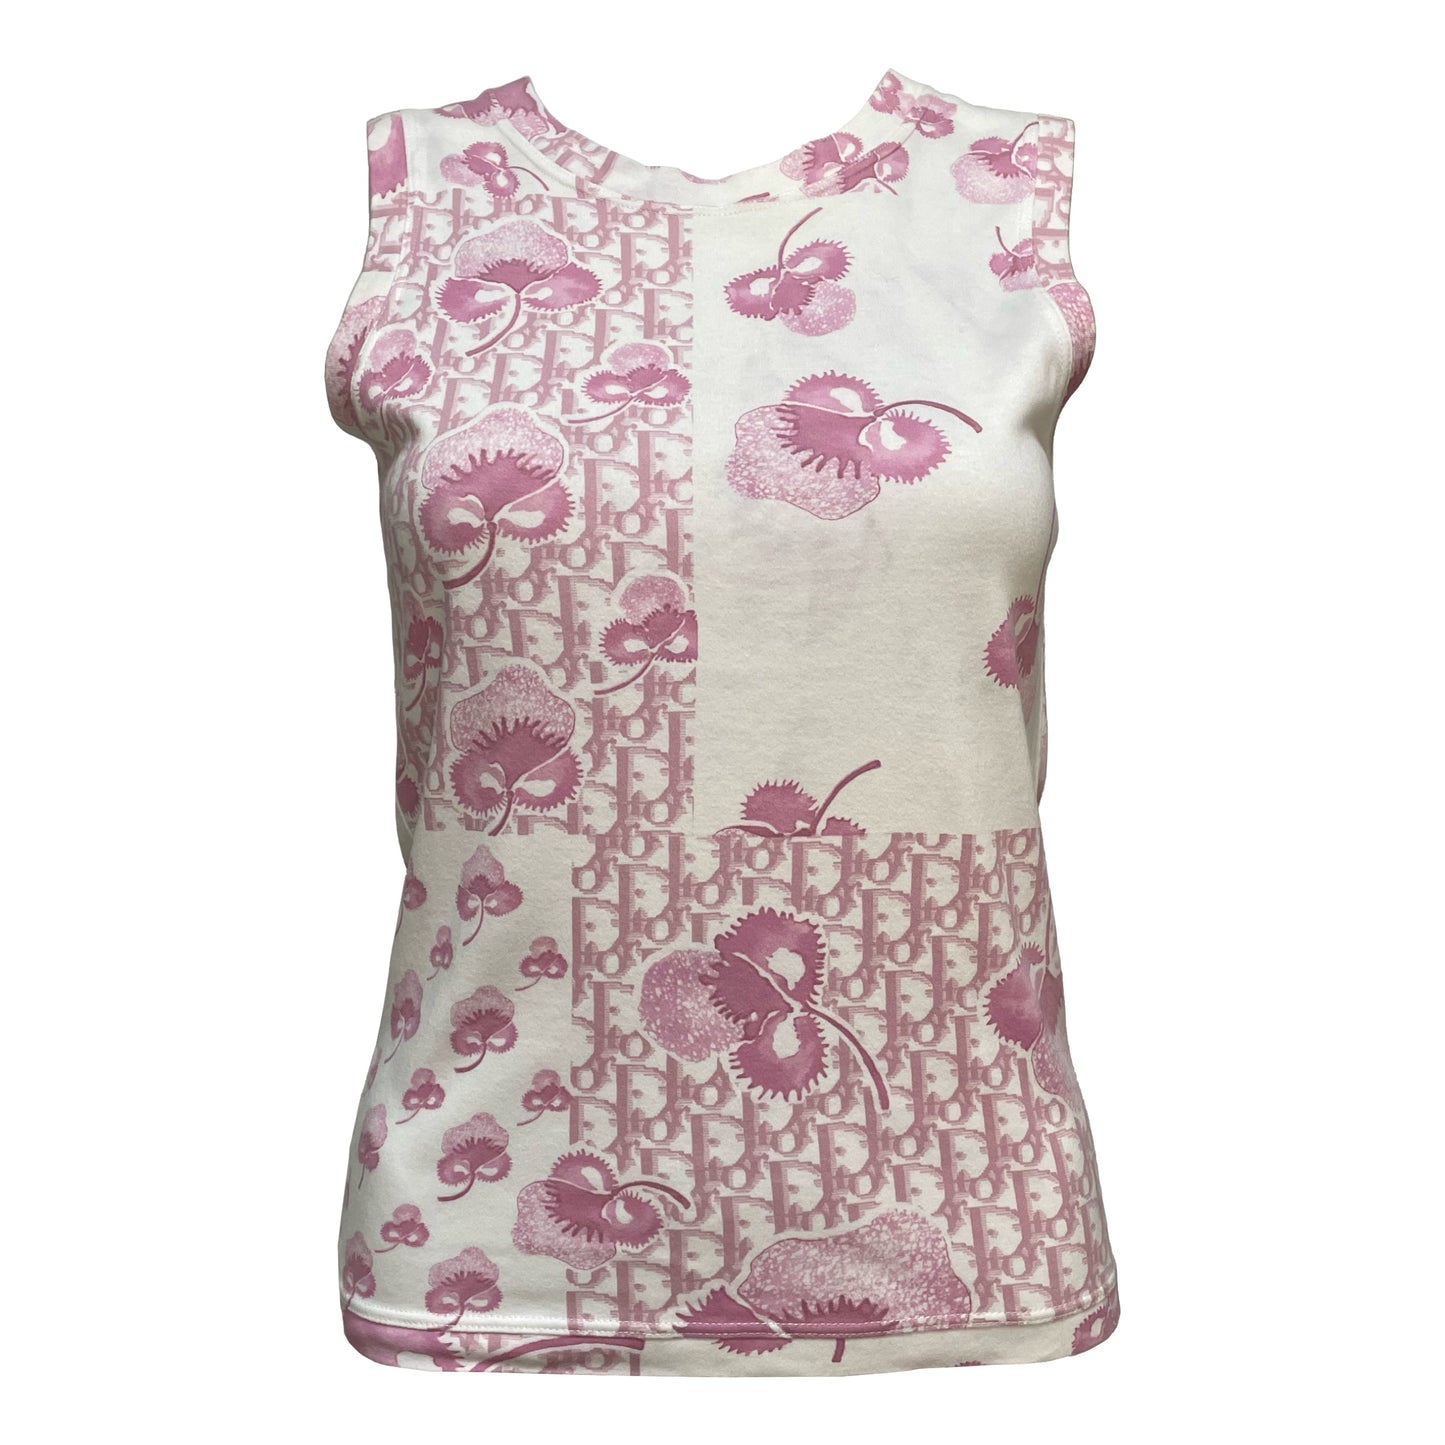 CHRISTIAN DIOR Trotter Floral Print Tank Top